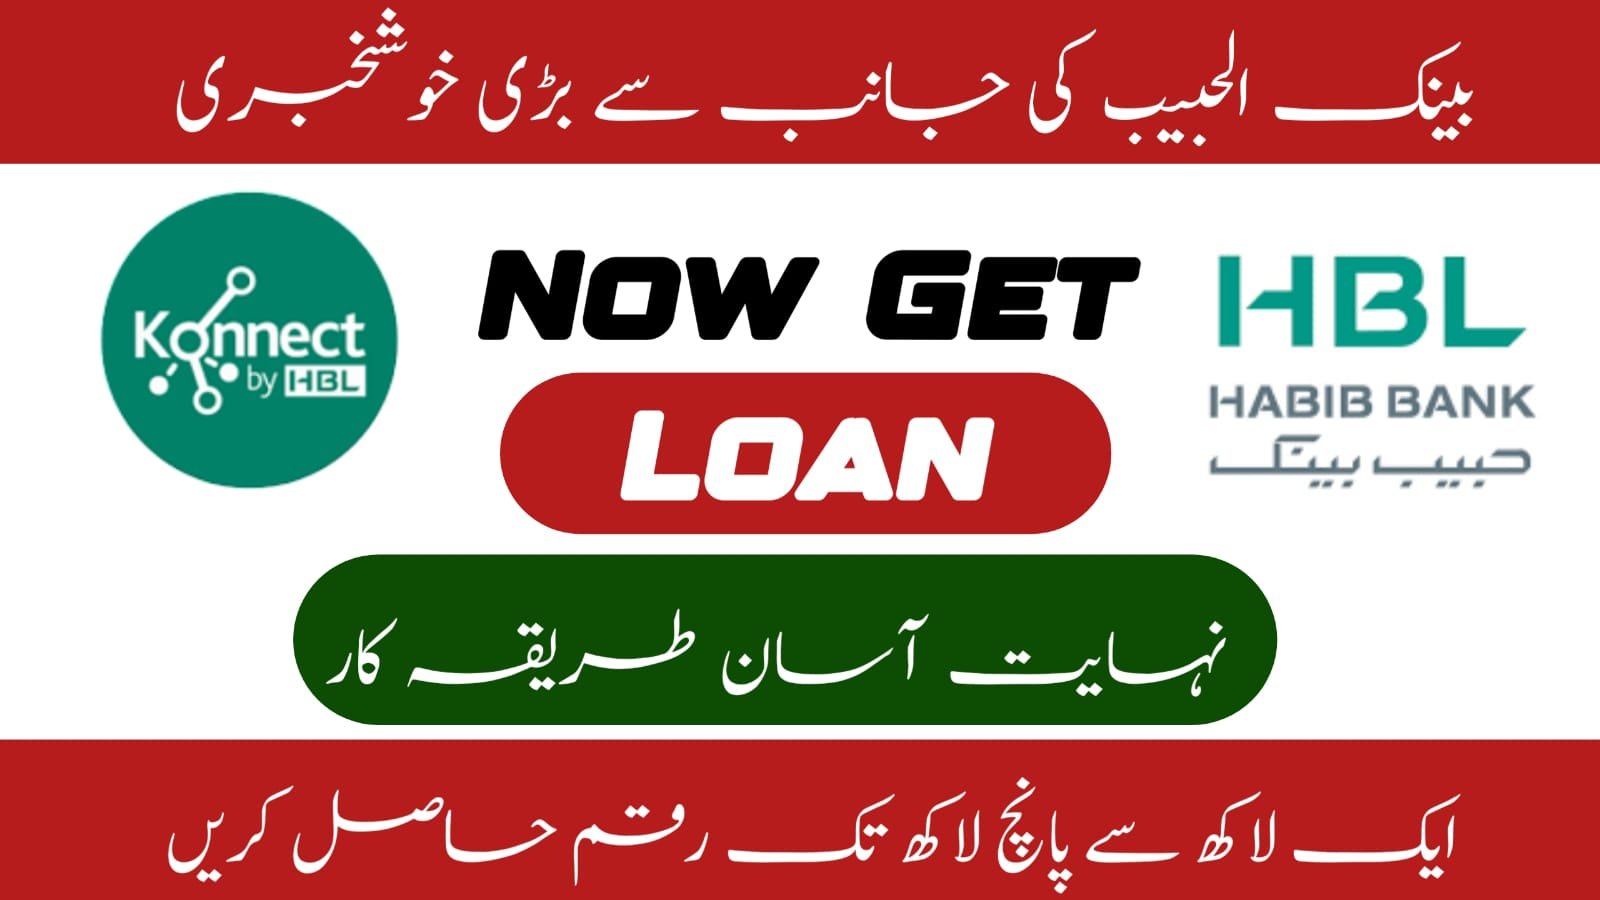 HBL Announced Laon For People